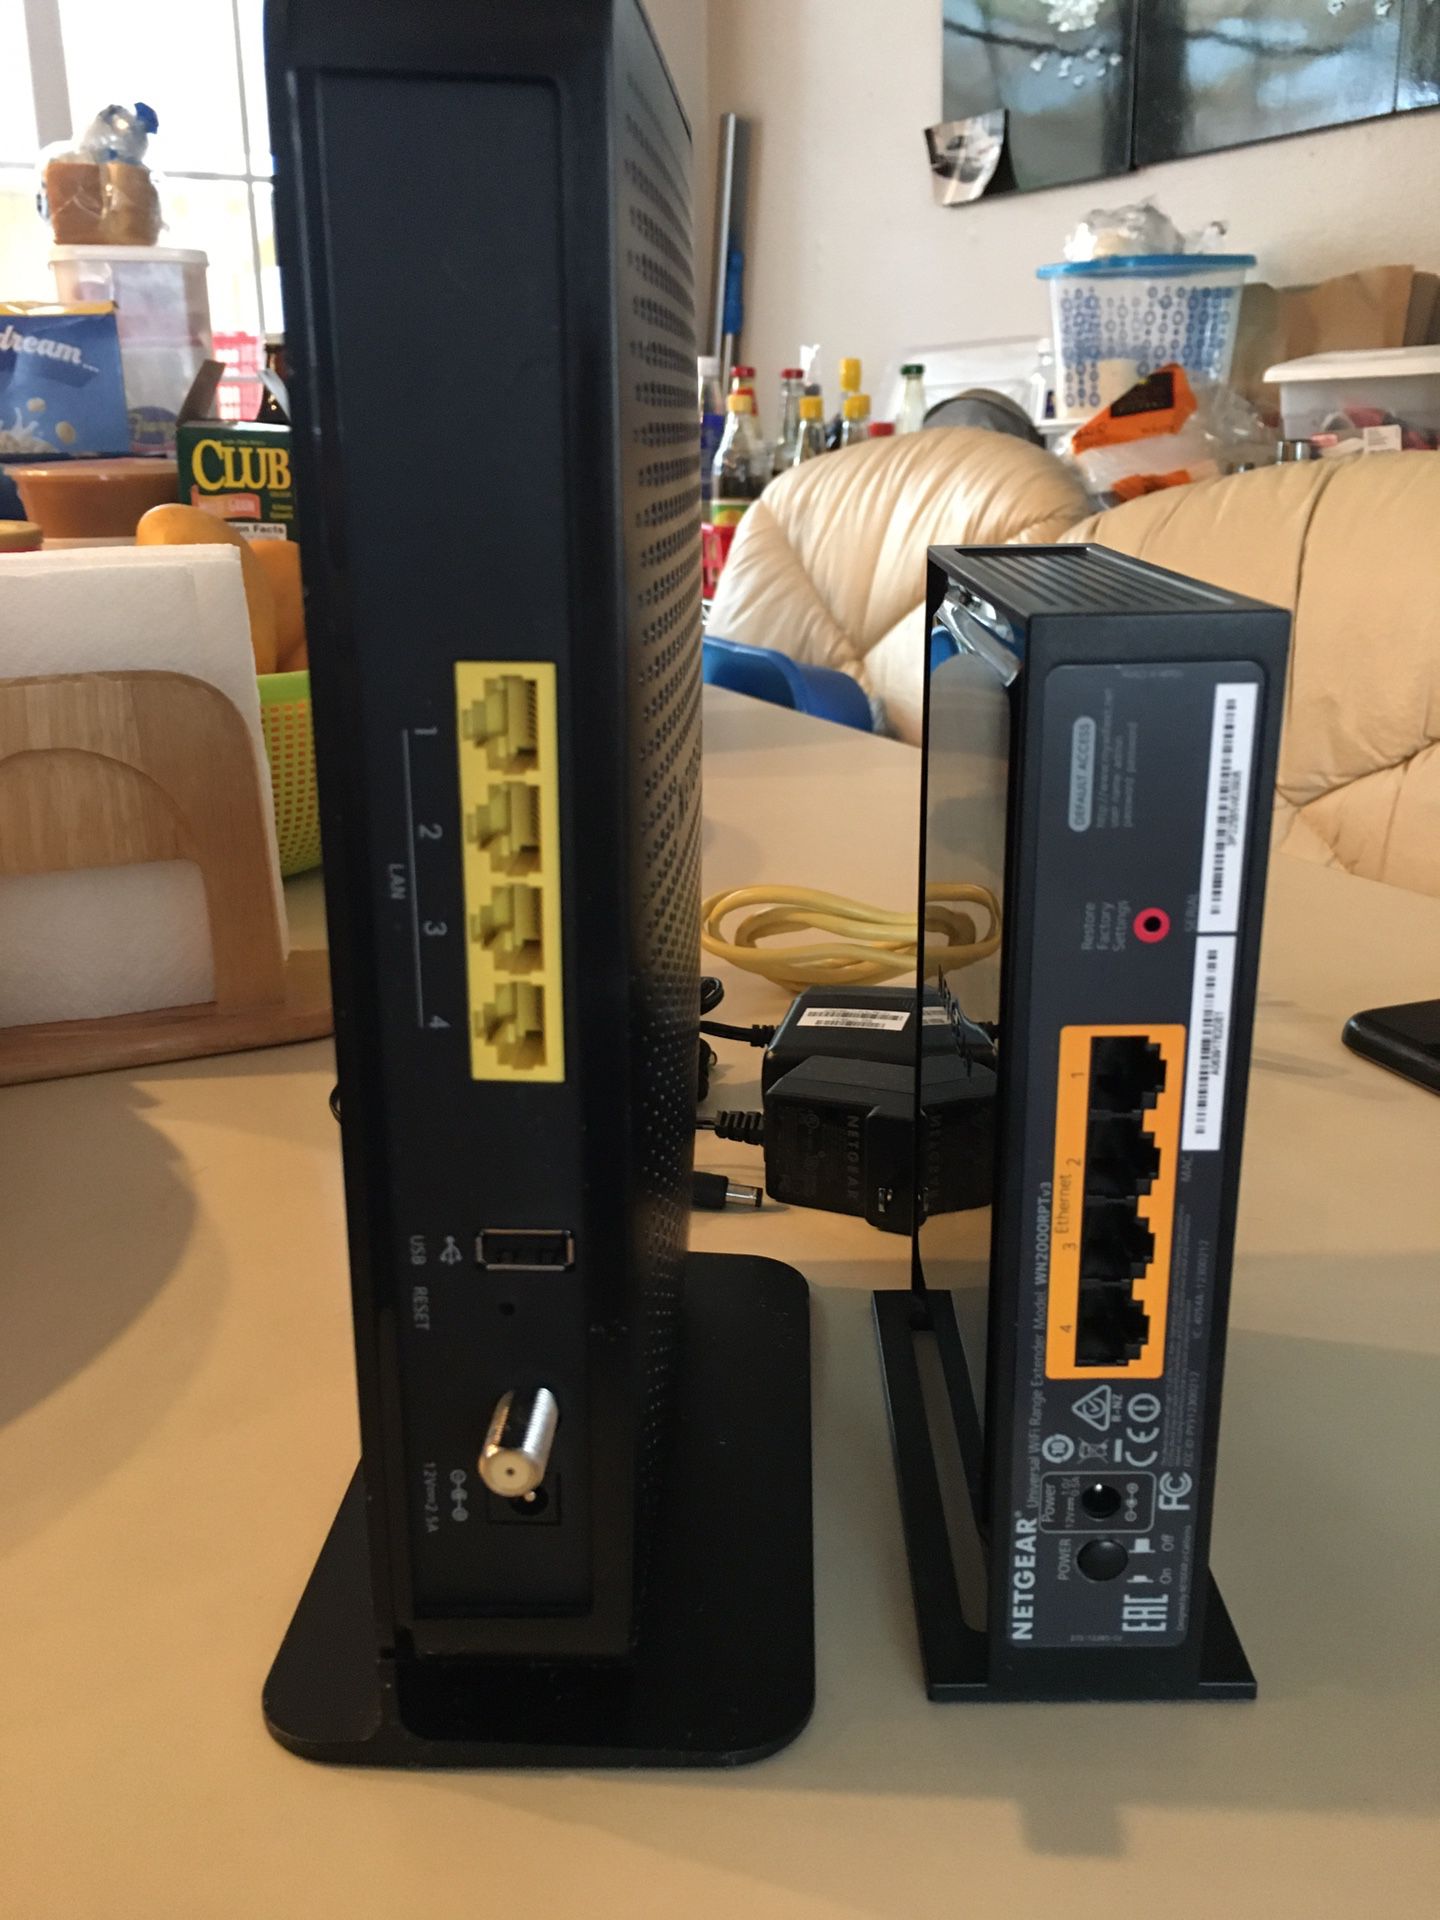 Cable modem and wifi range extender